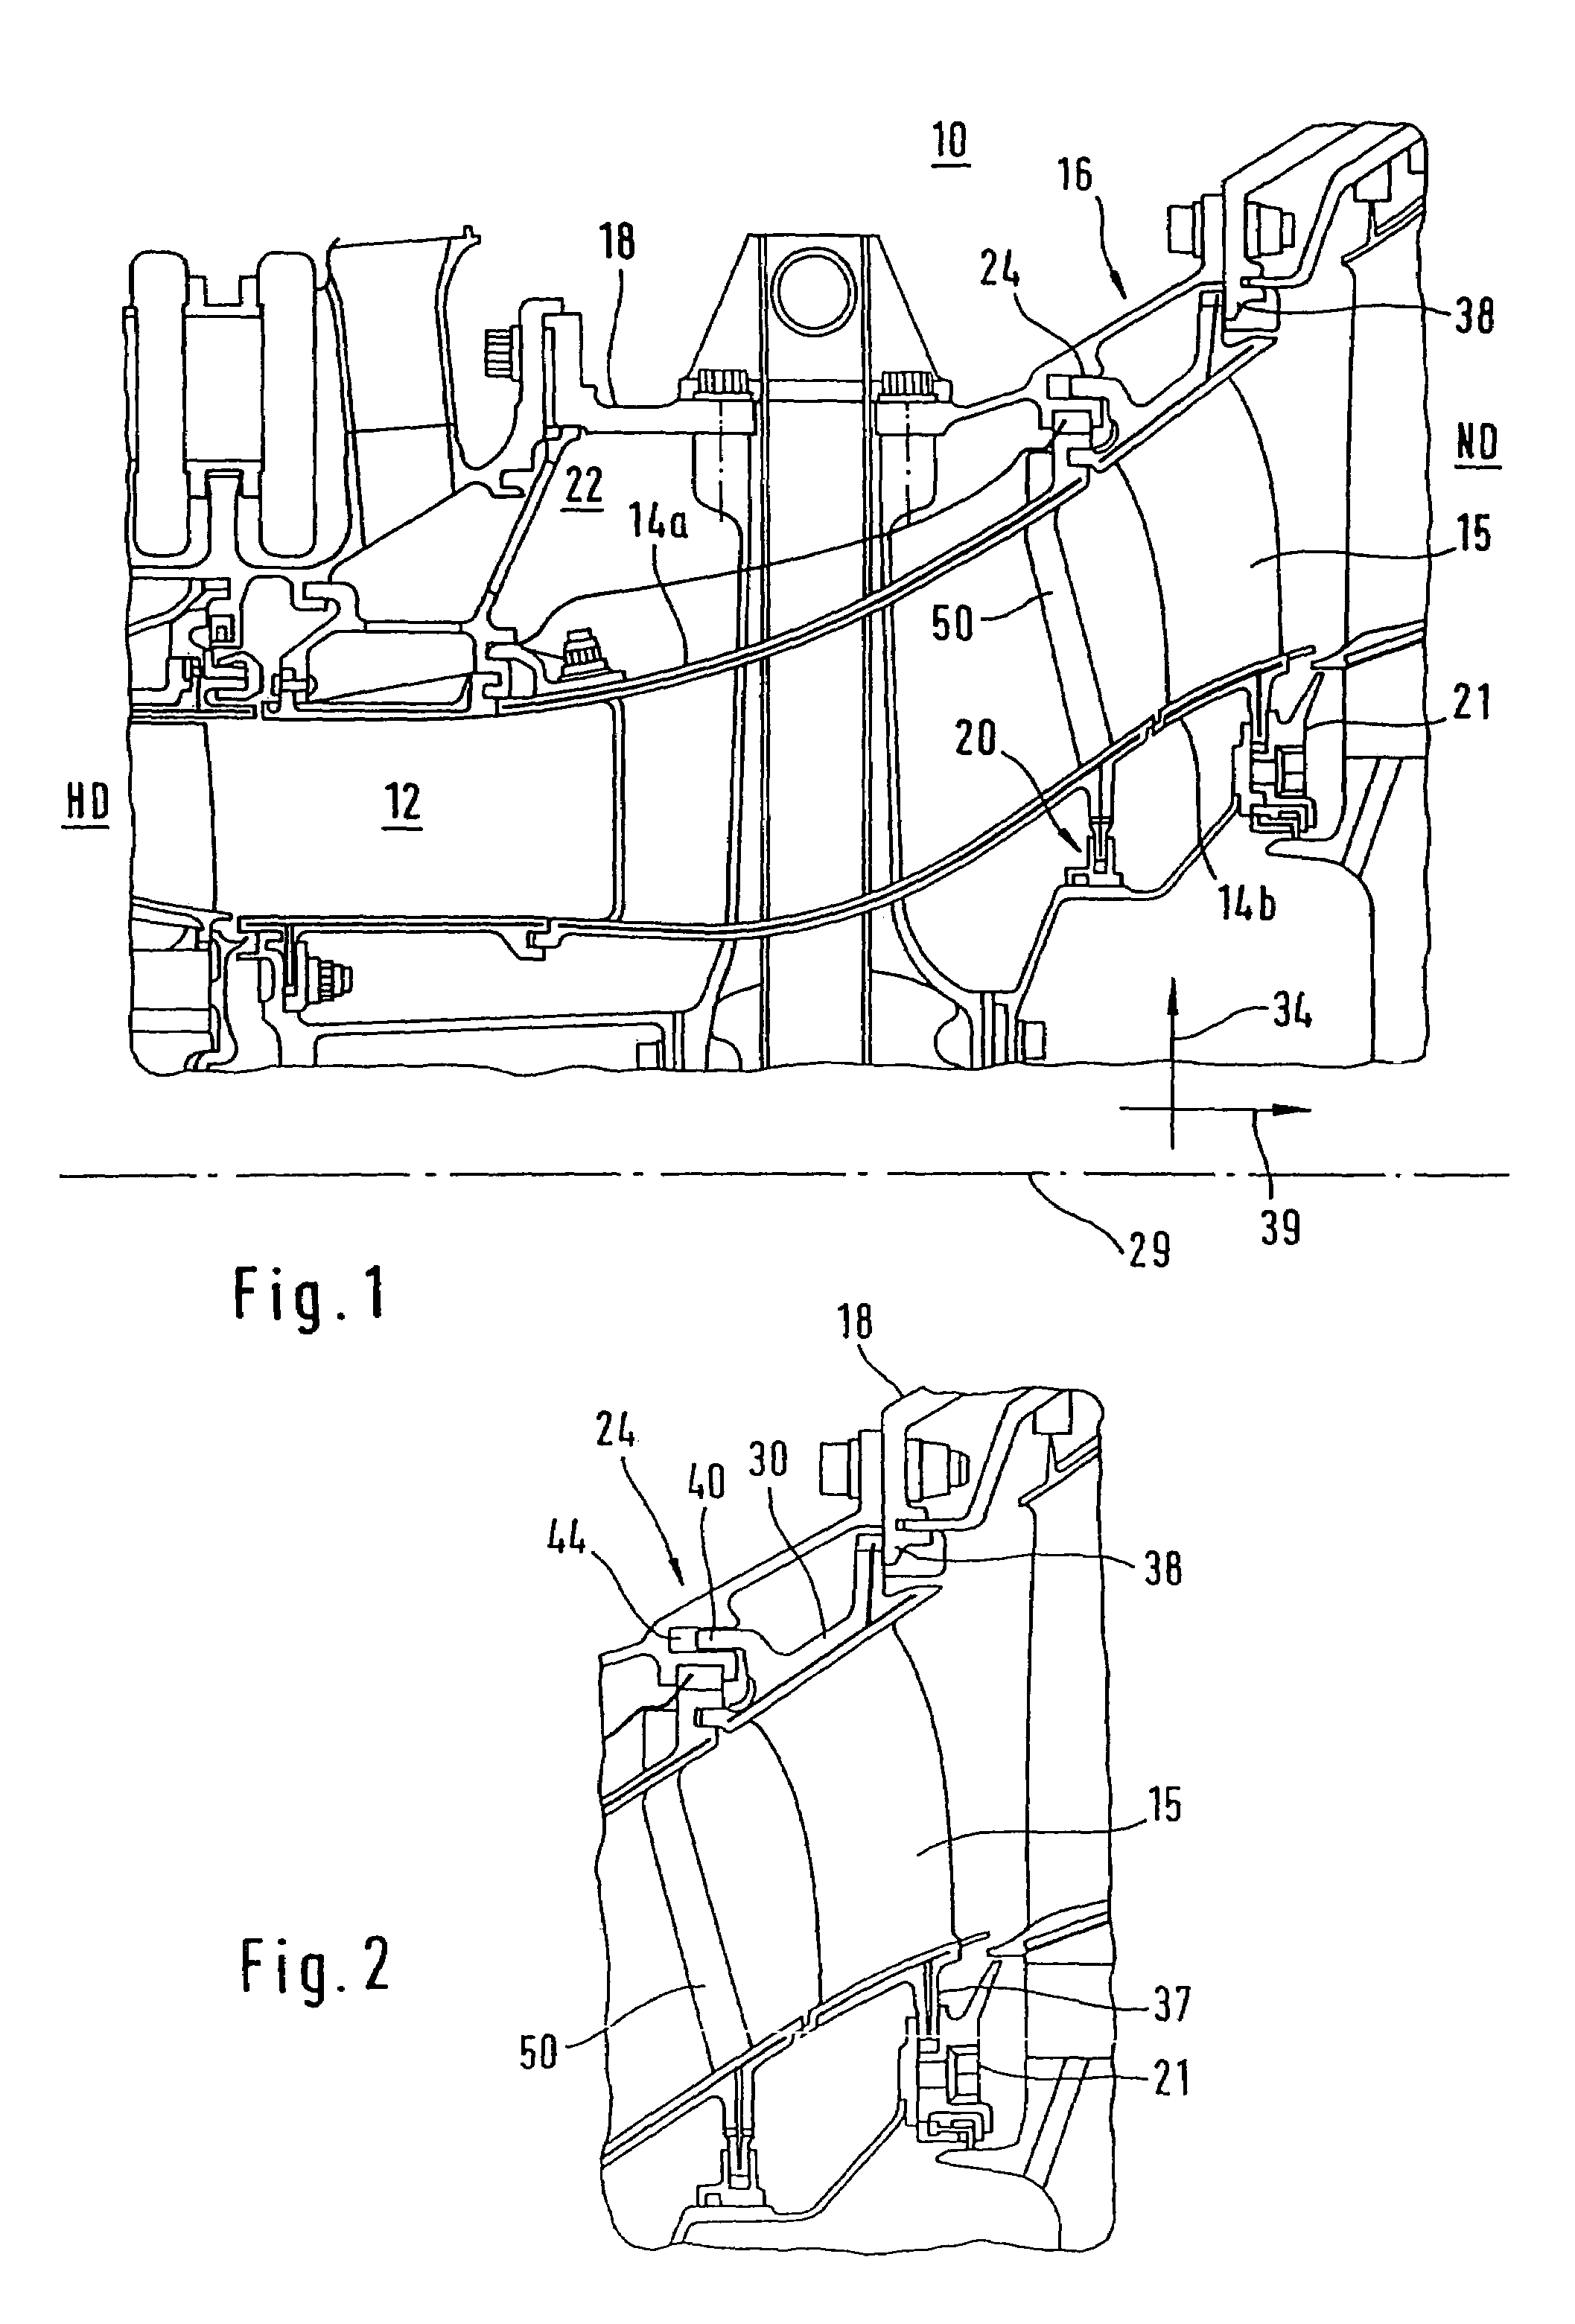 Guide blade fixture in a flow channel of an aircraft gas turbine